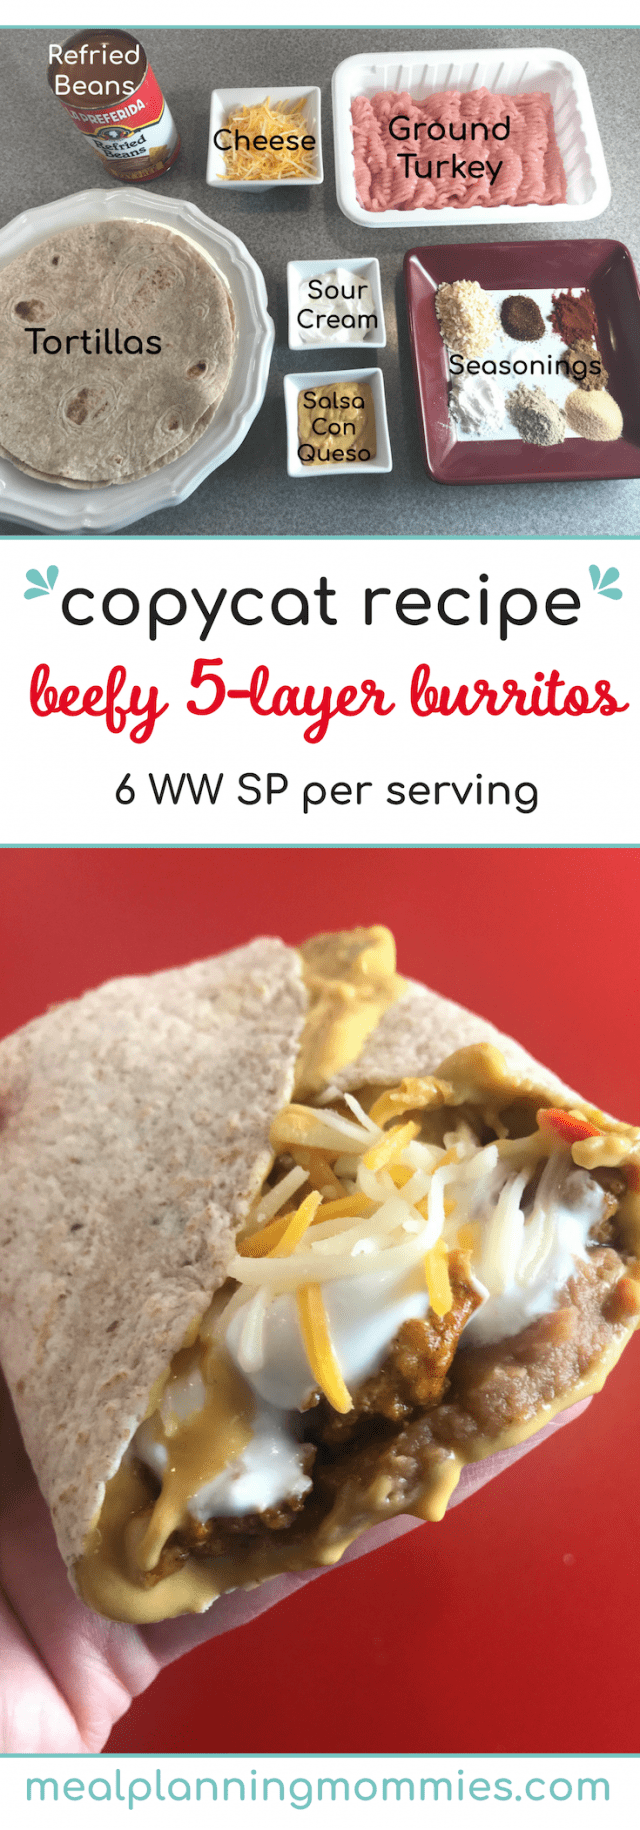  Beefy 5-layer burrito on Meal Planning Mommies - Just 6 WW FreeStyle SP per burrito